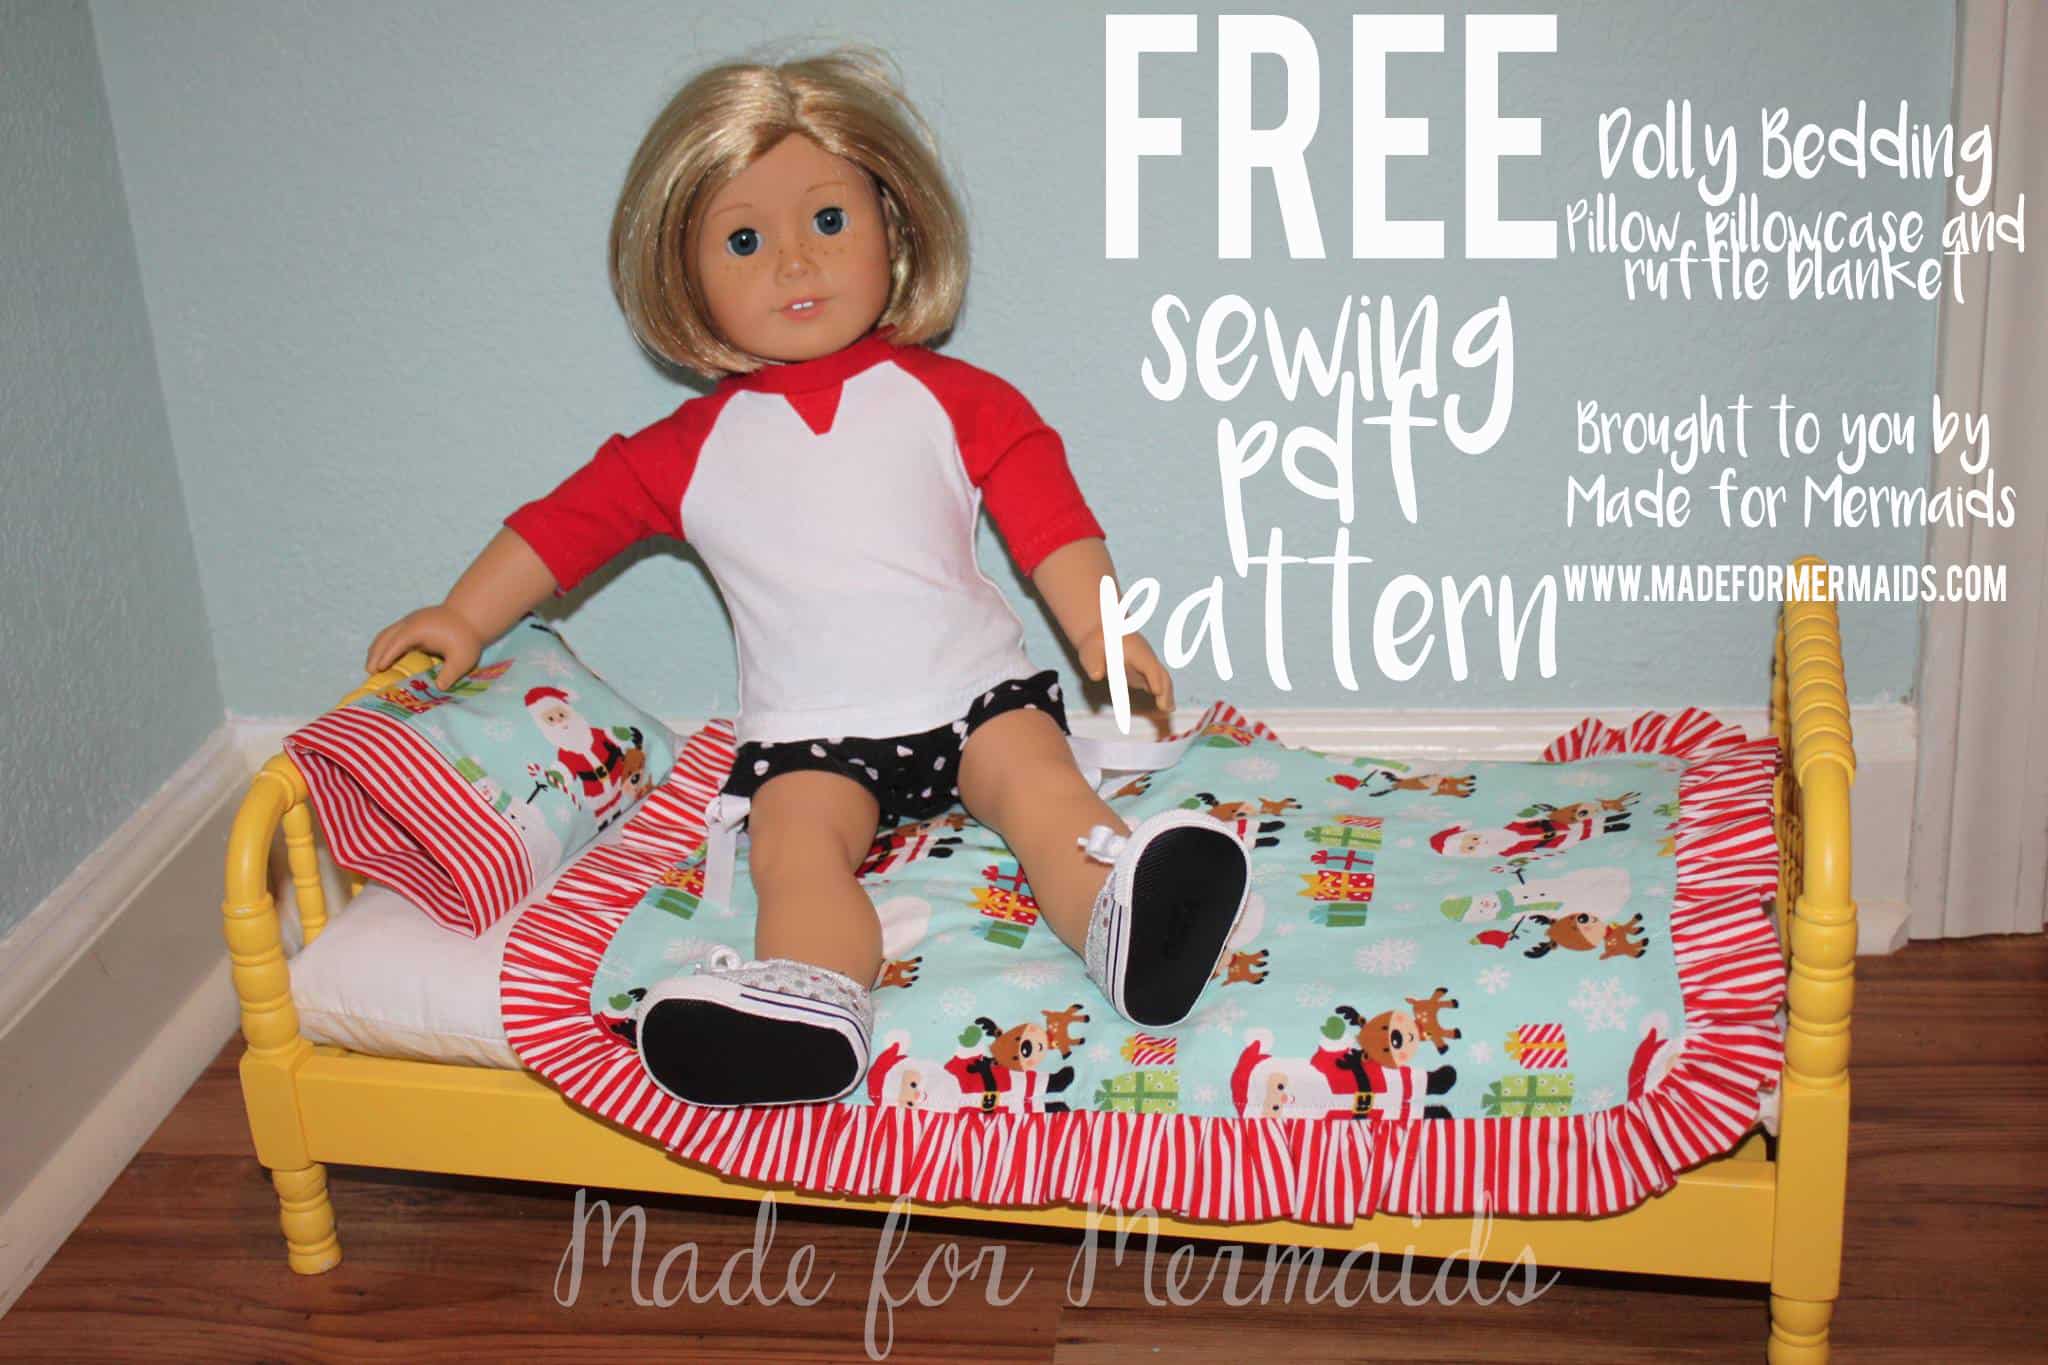 FREE Dolly bedding- pillow, pillowcase and ruffle blanket